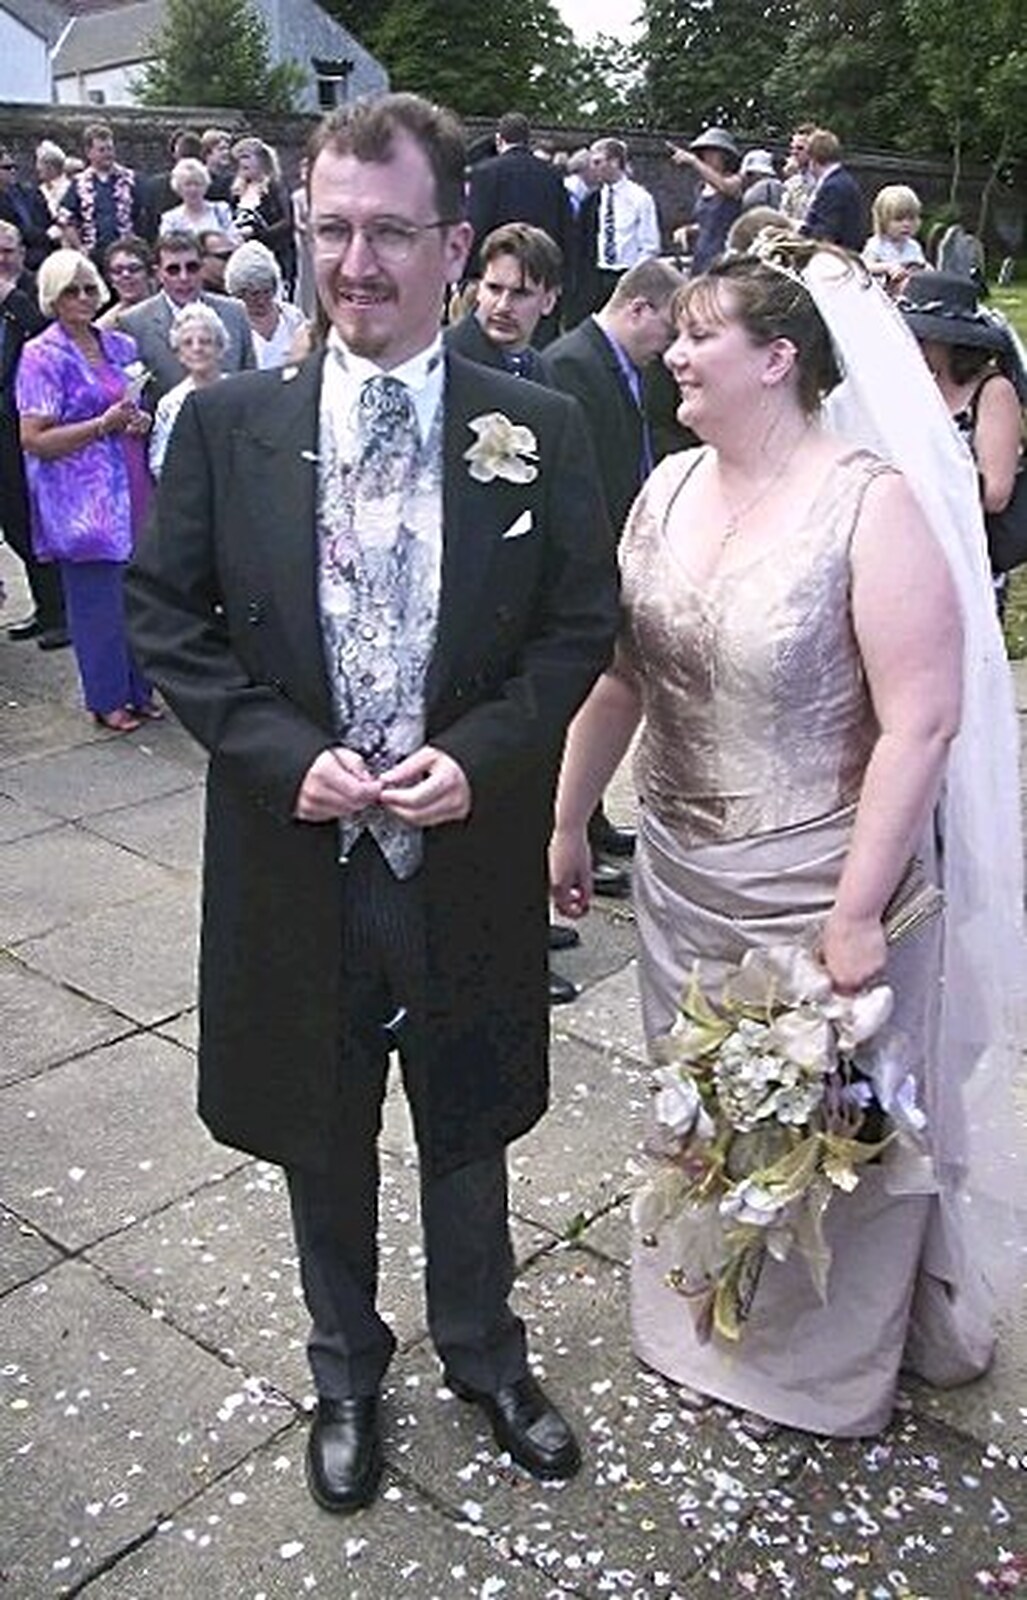 Phil and a pile of confetti on the floor from Phil and Lisa's Wedding, Woolverston Hall, Ipswich, Suffolk - 1st July 2001